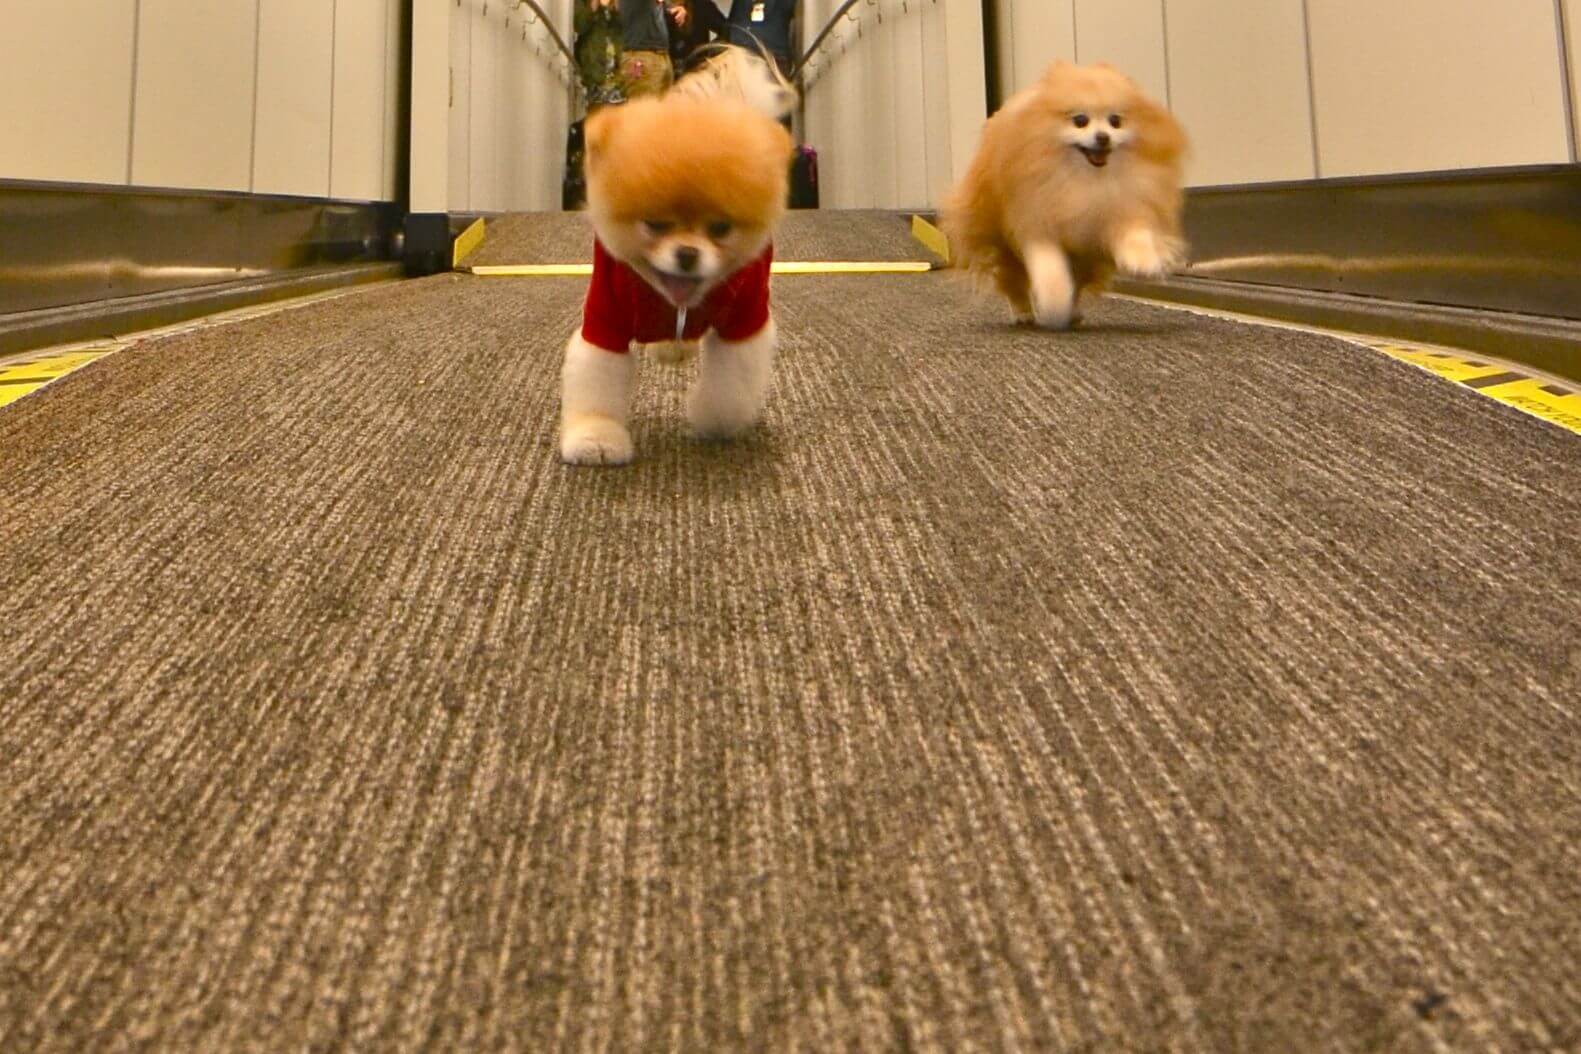 Boo the Pomeranian (L), named the cutest dog in the world, and friend Buddy